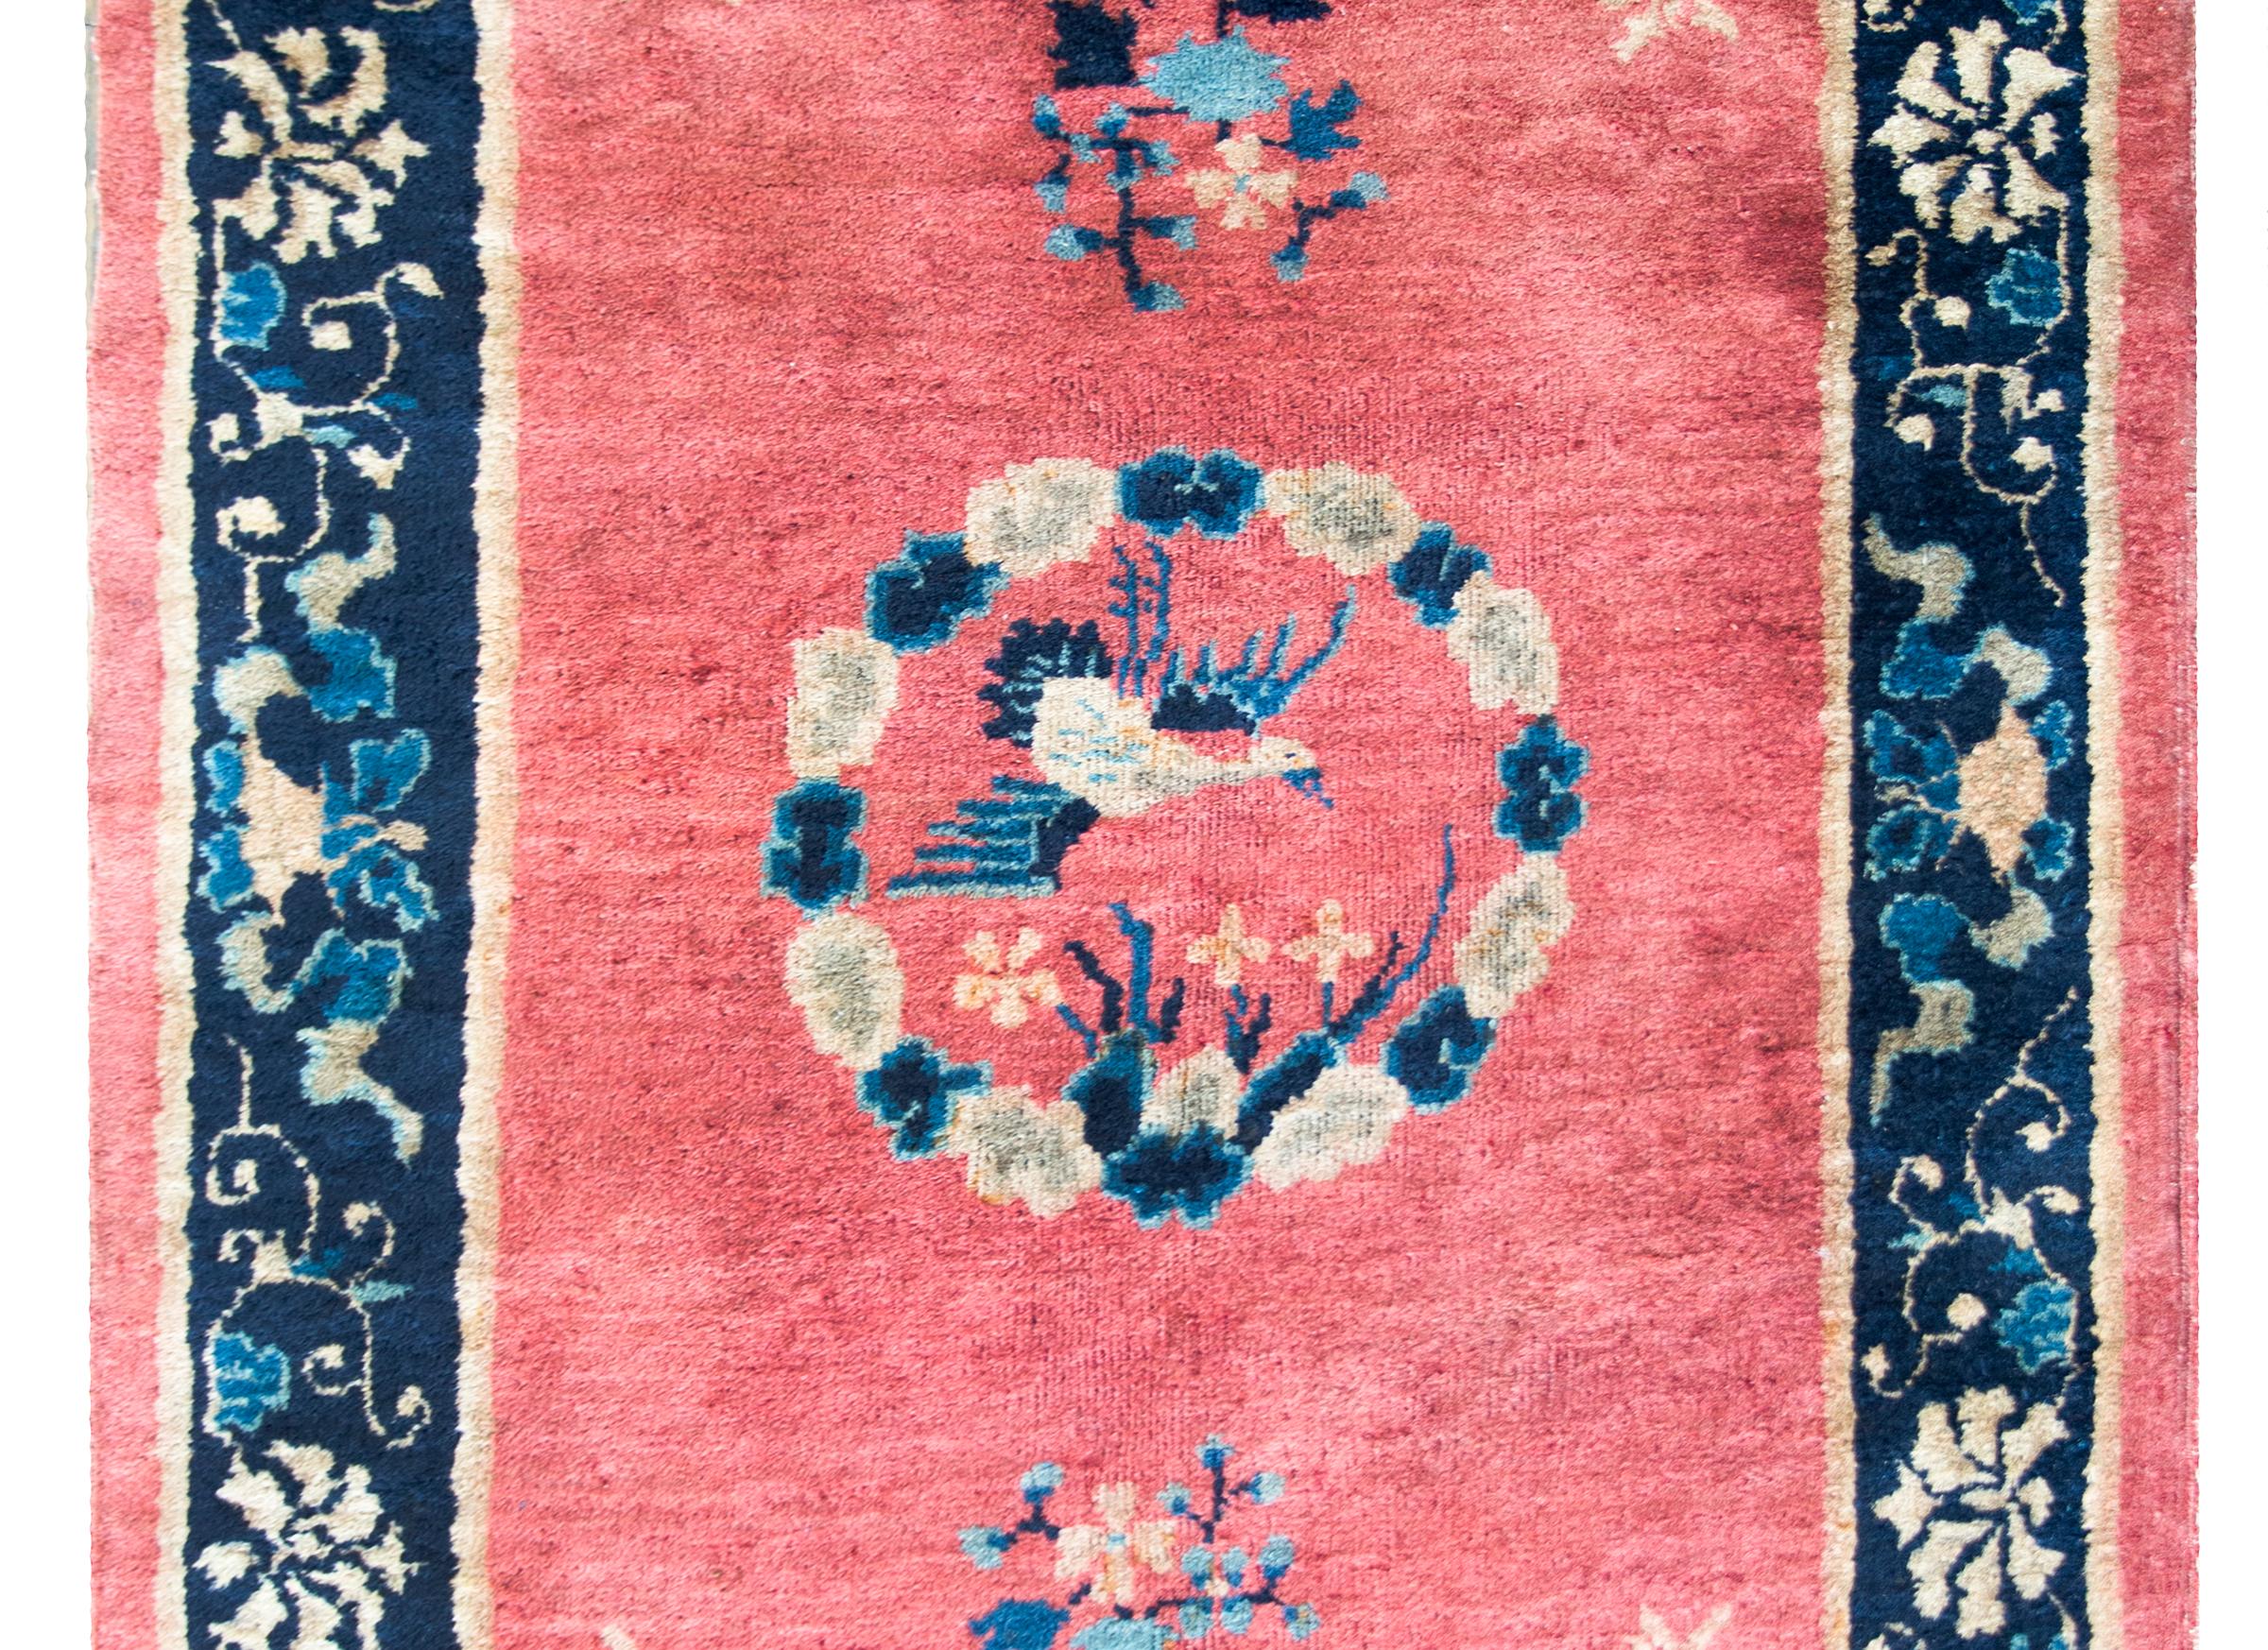 A wonderful early 20th century Chinese Art Deco rug with a central billowing cloud medallion surrounding a Phoenix, and living amidst a coral field with light and dark indigo peonies and cherry blossoms.  The border is sweet with even more